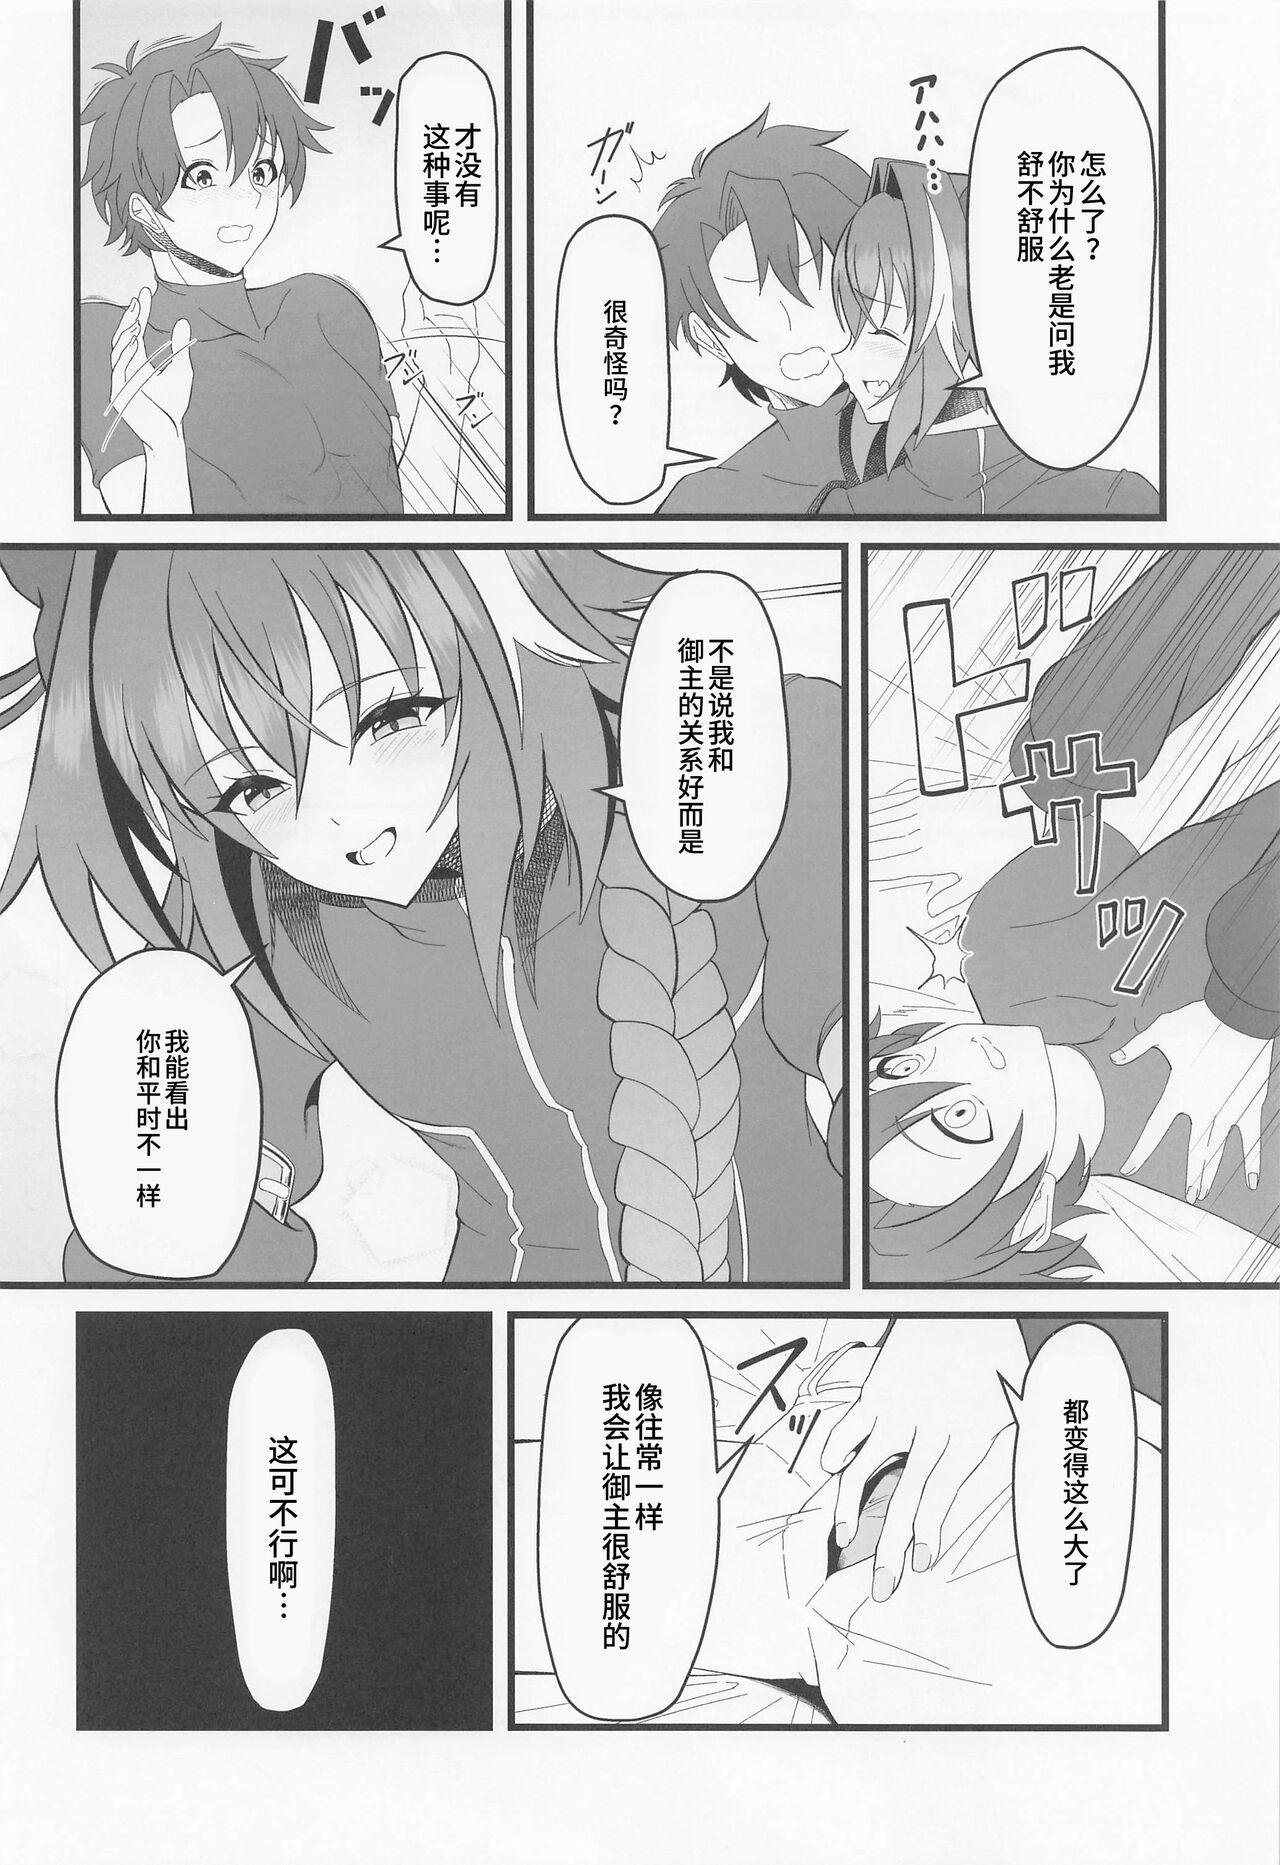 Shorts Kimi no Ichiban ni Naritakute - I wanted to be your number one. - Fate grand order Erotica - Page 7